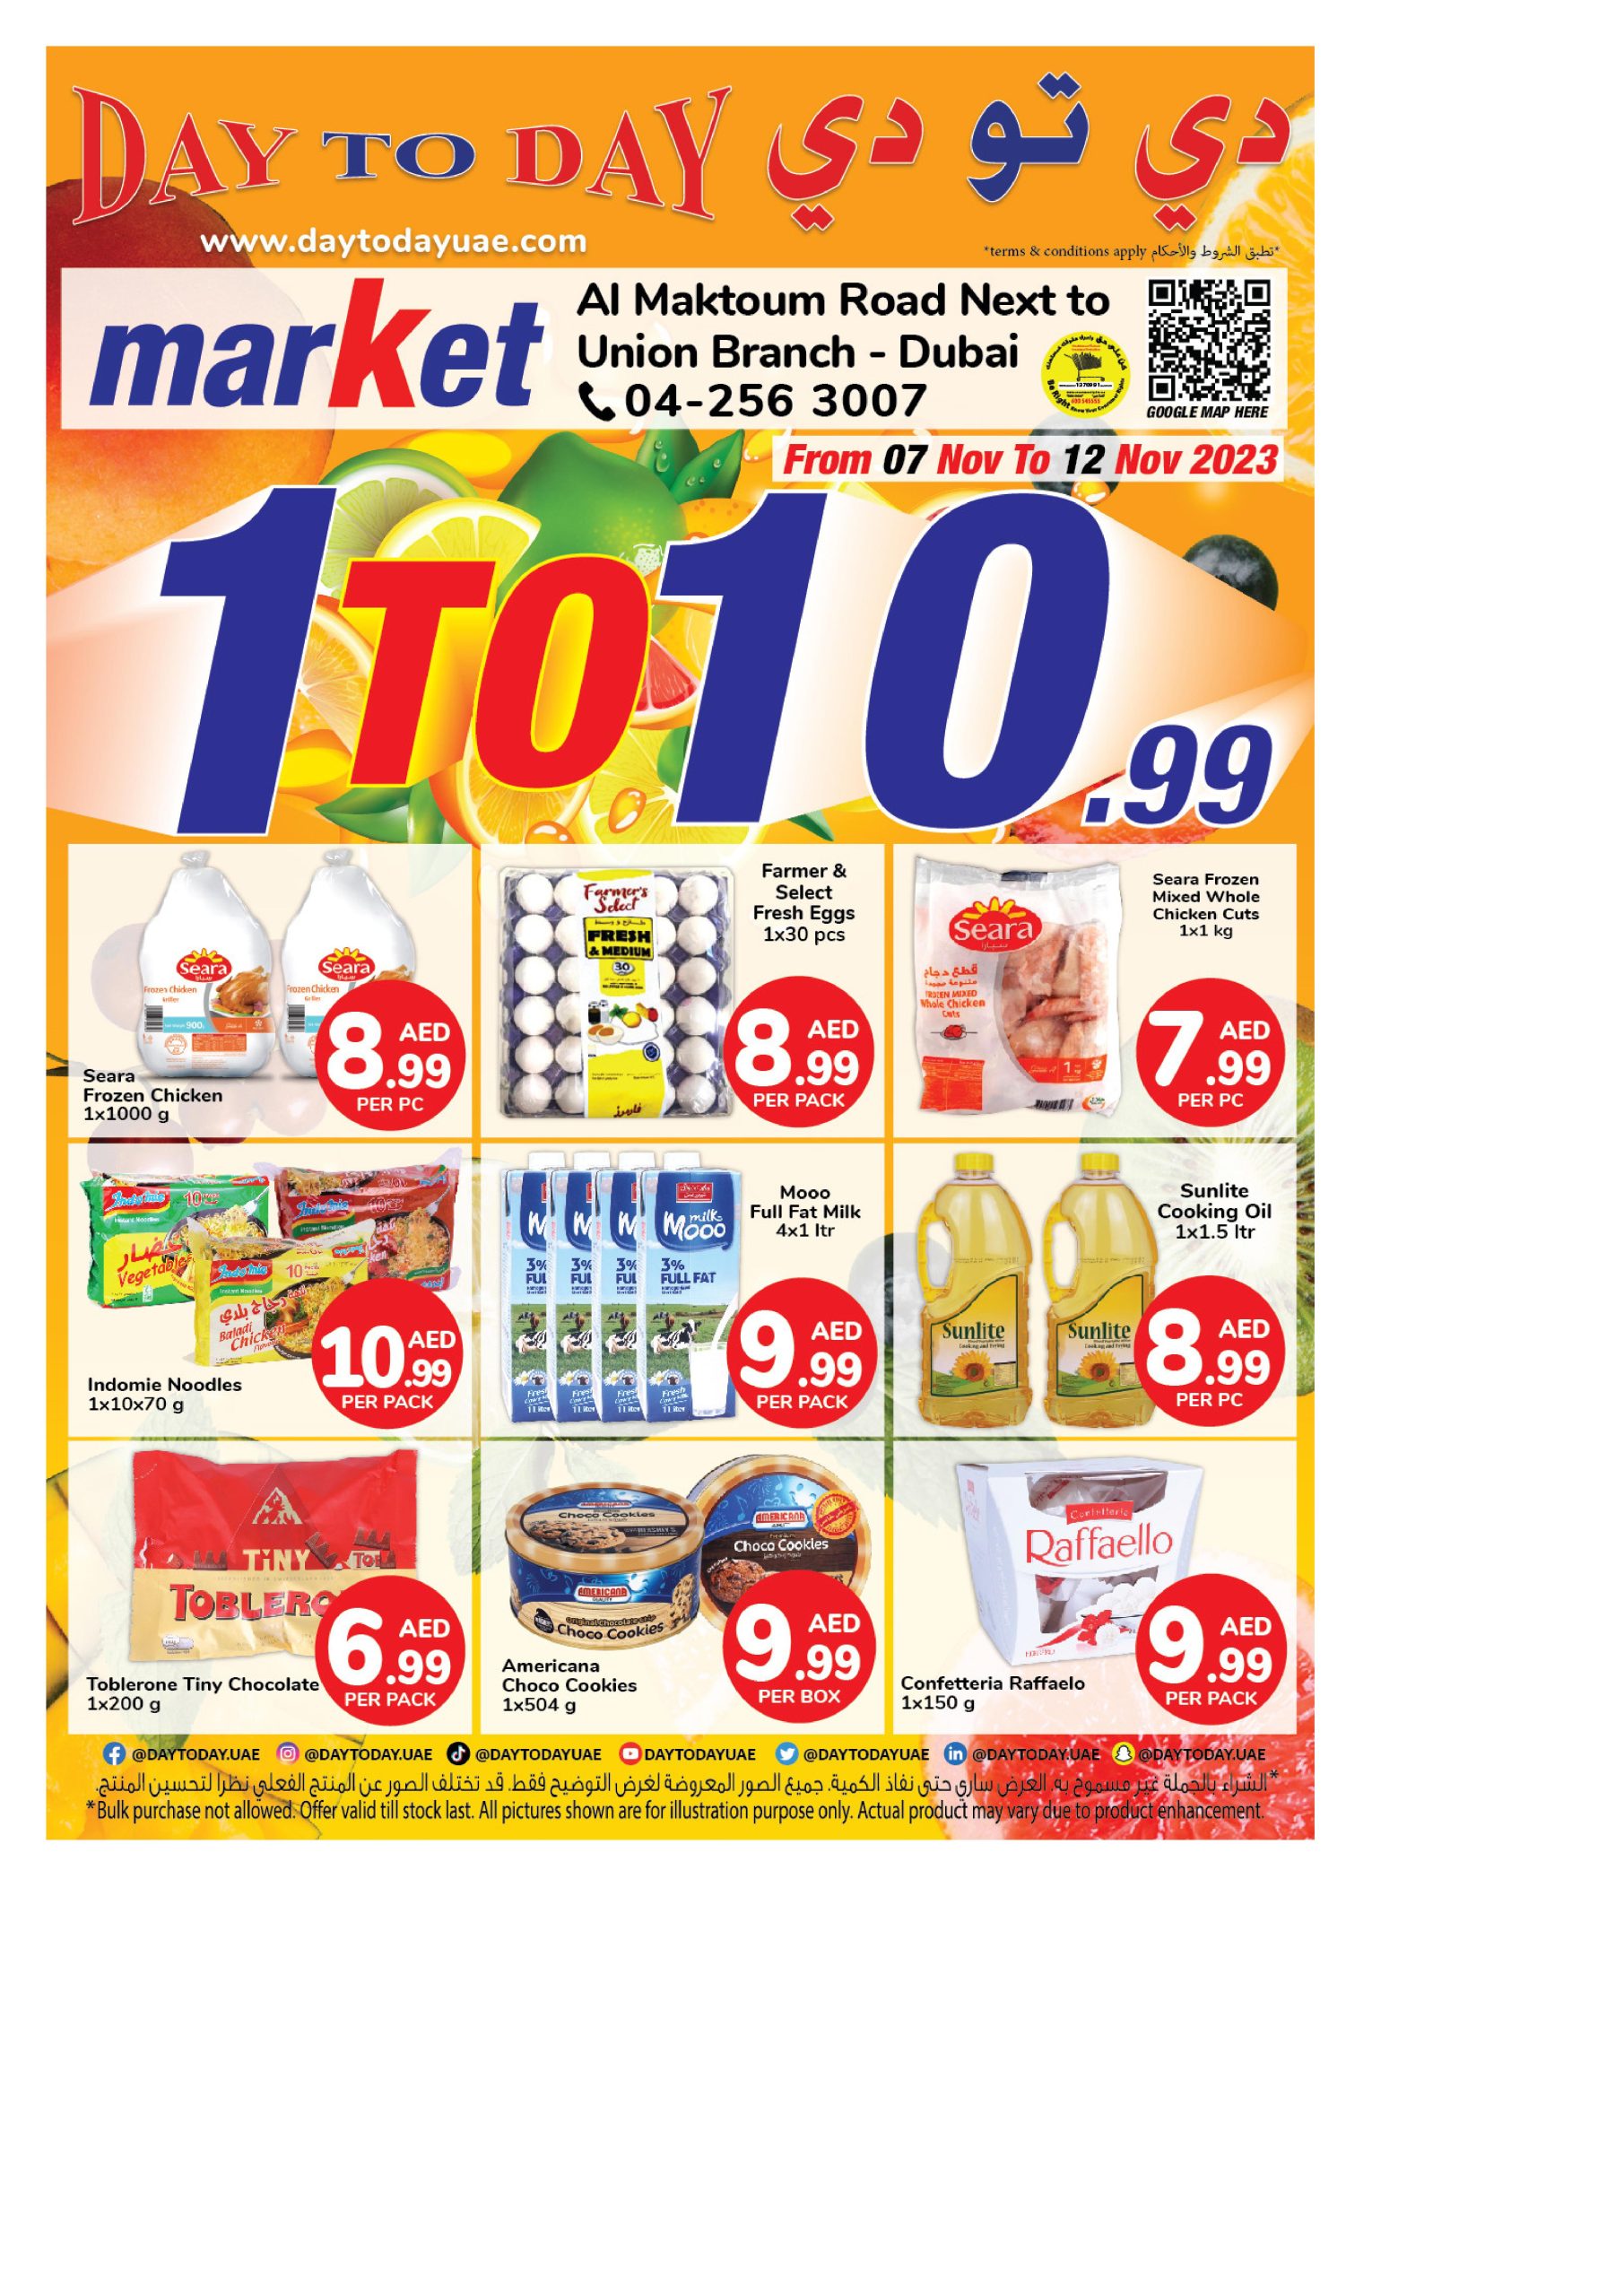 Day To Day Offers Catalog-1